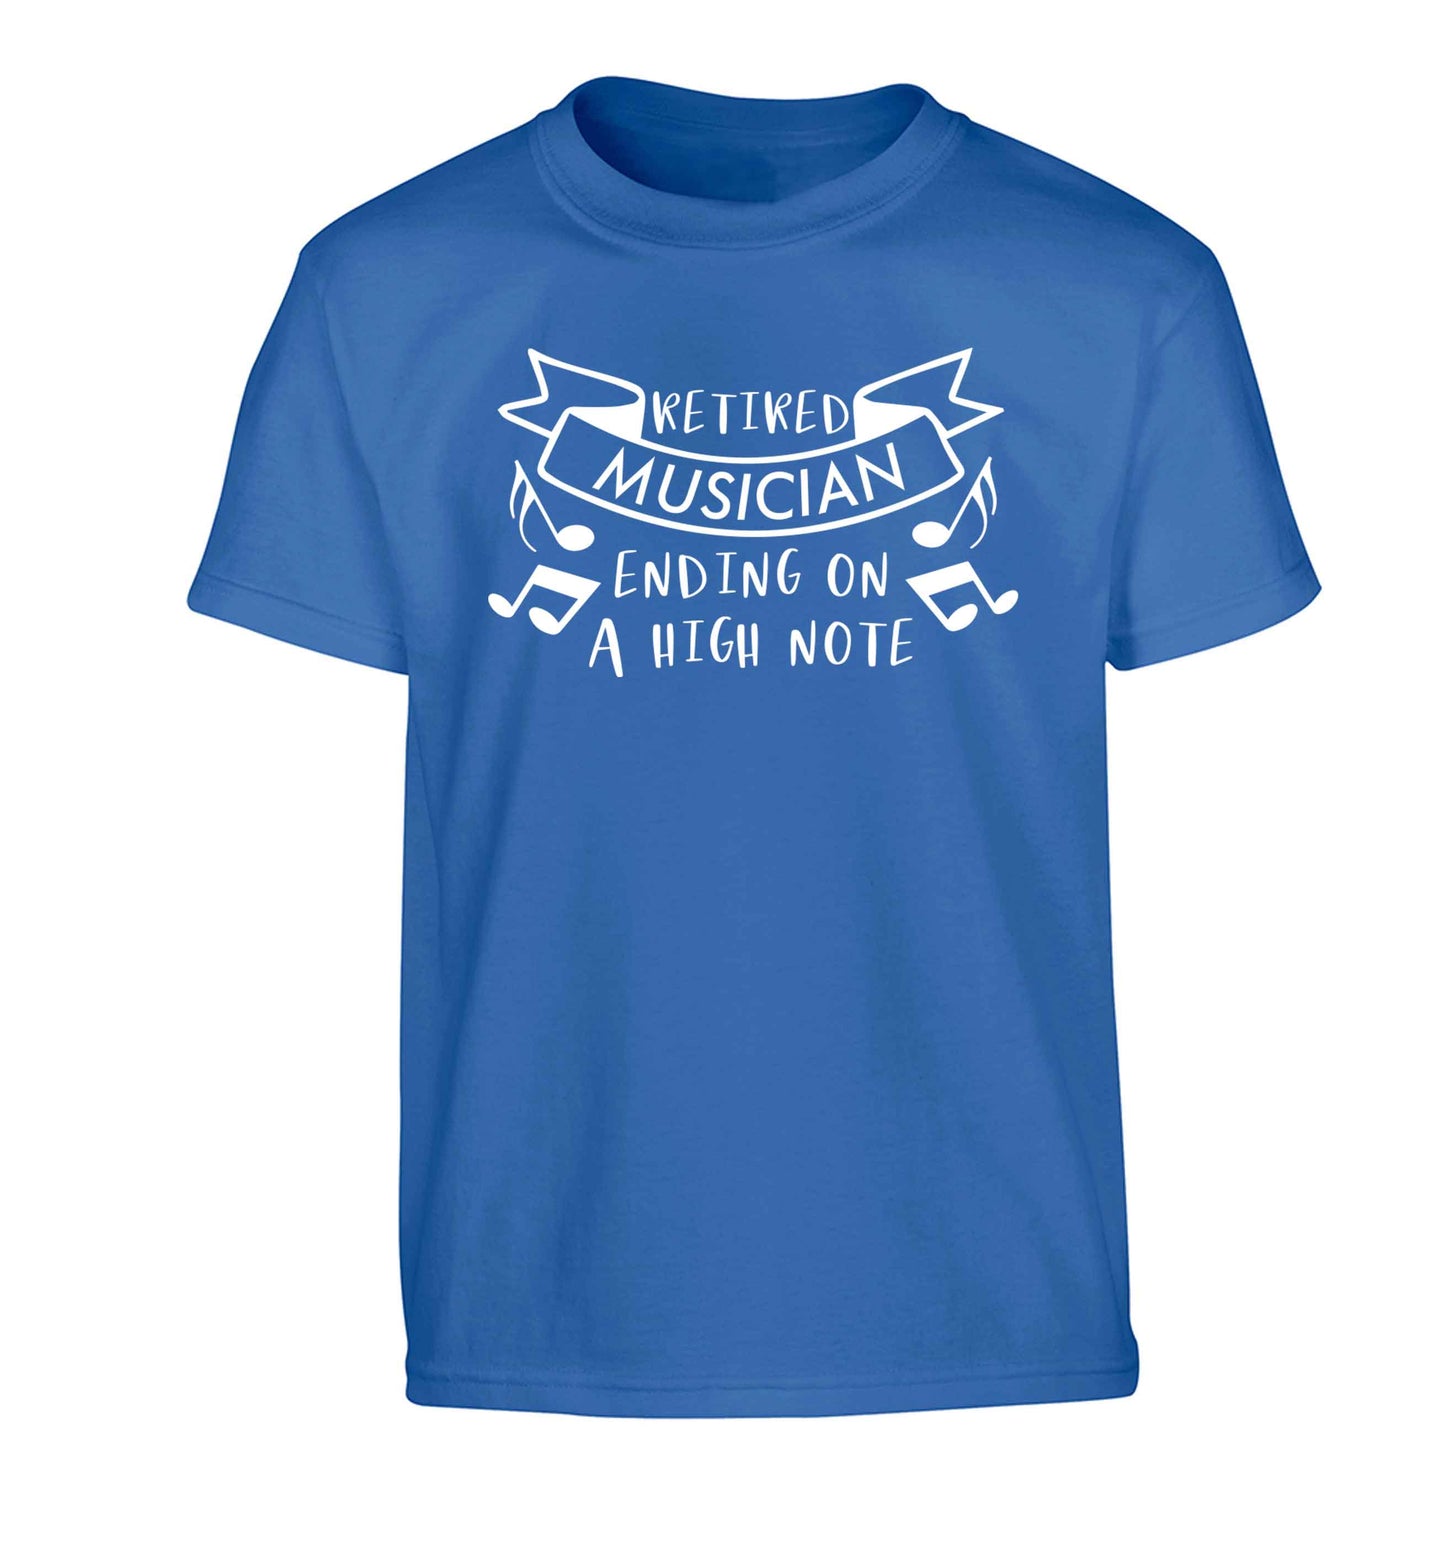 Retired musician ending on a high note Children's blue Tshirt 12-13 Years